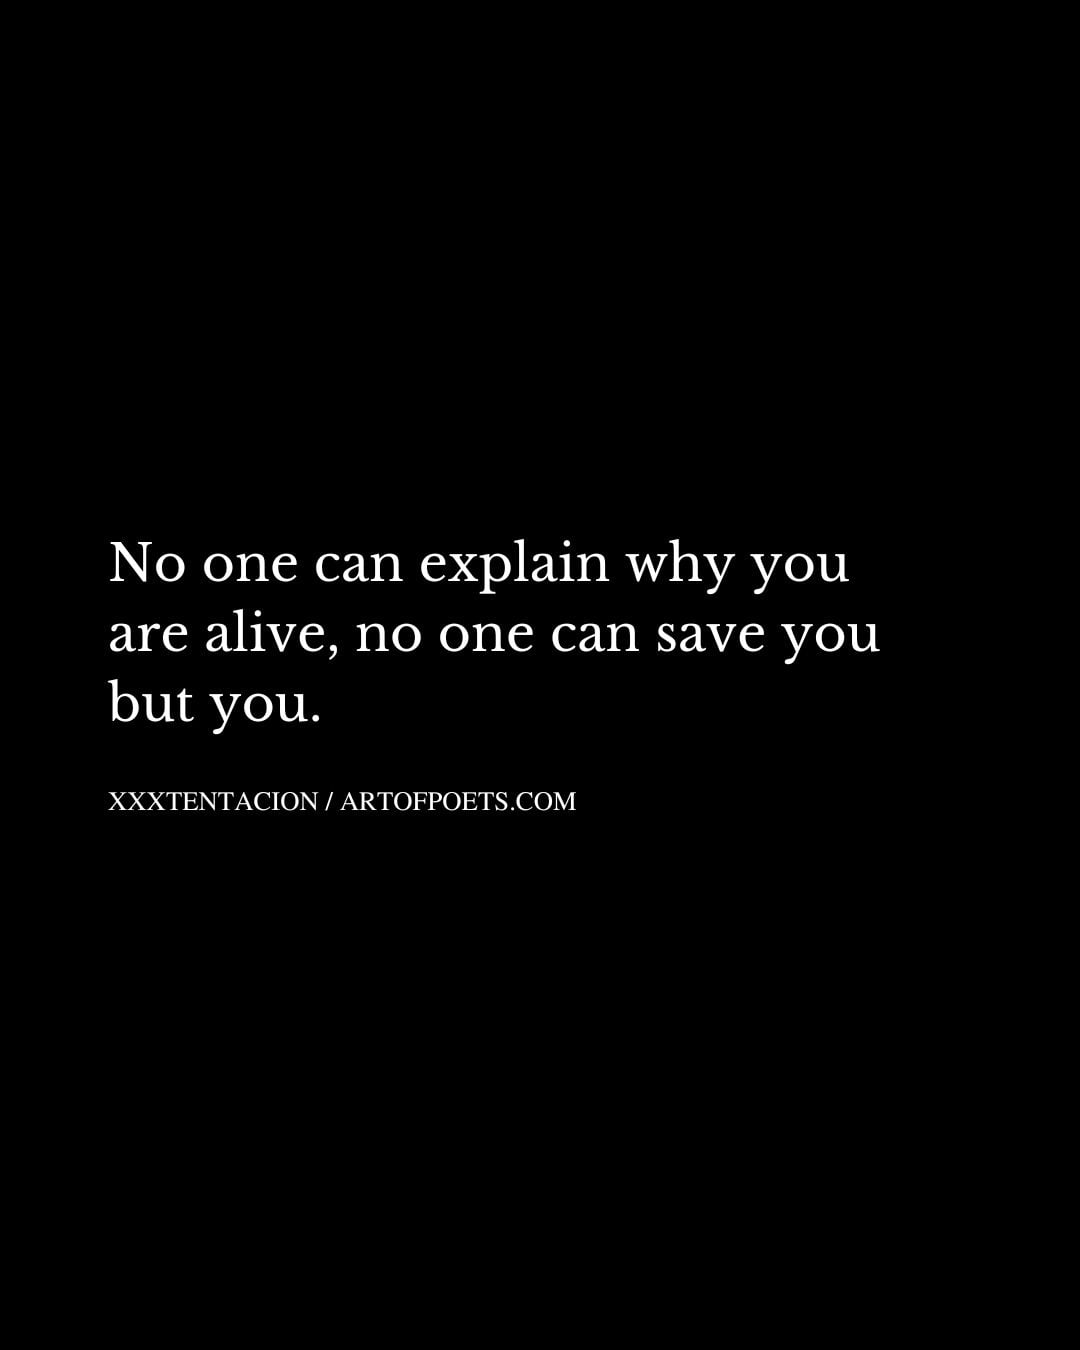 No one can explain why you are alive no one can save you but you